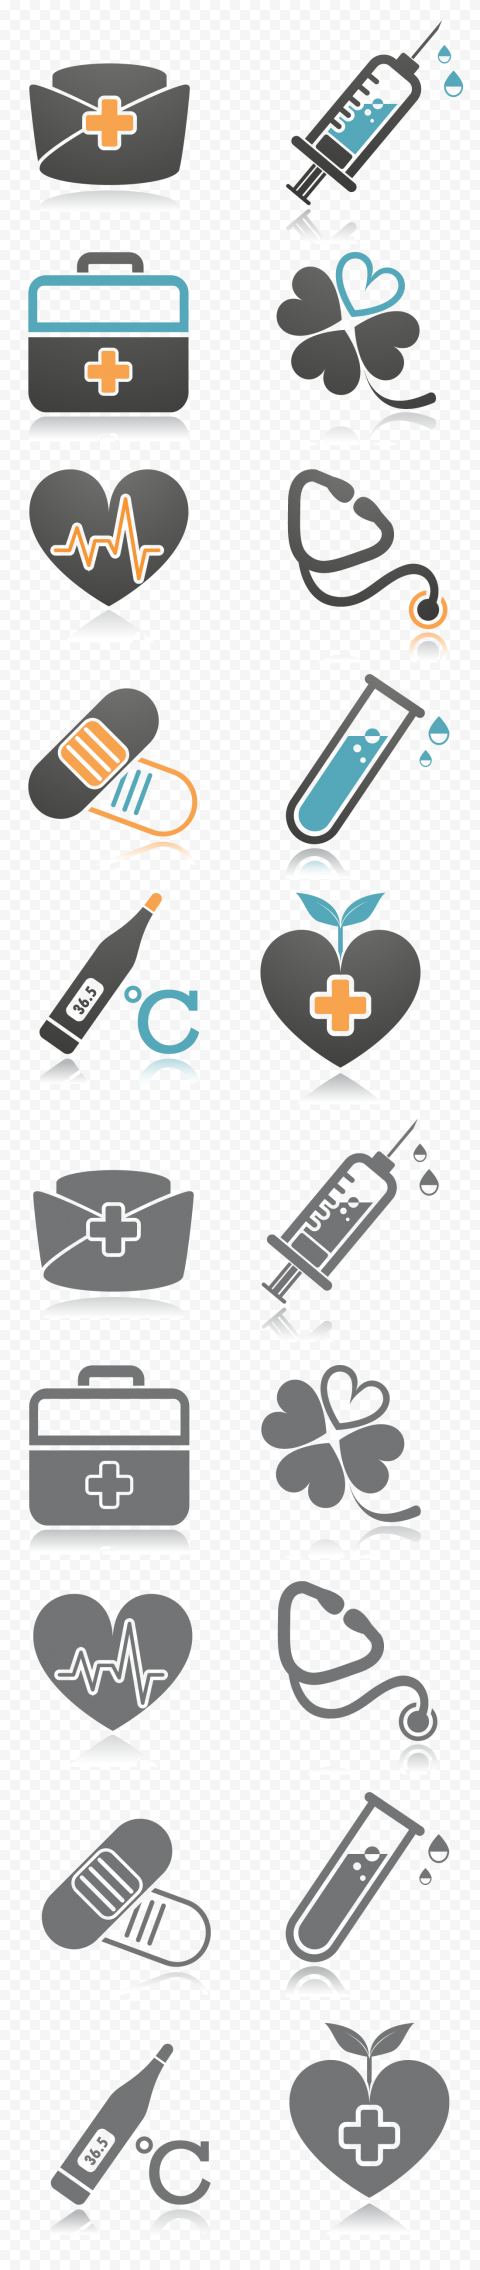 Collection Of Health Care Medical Icons